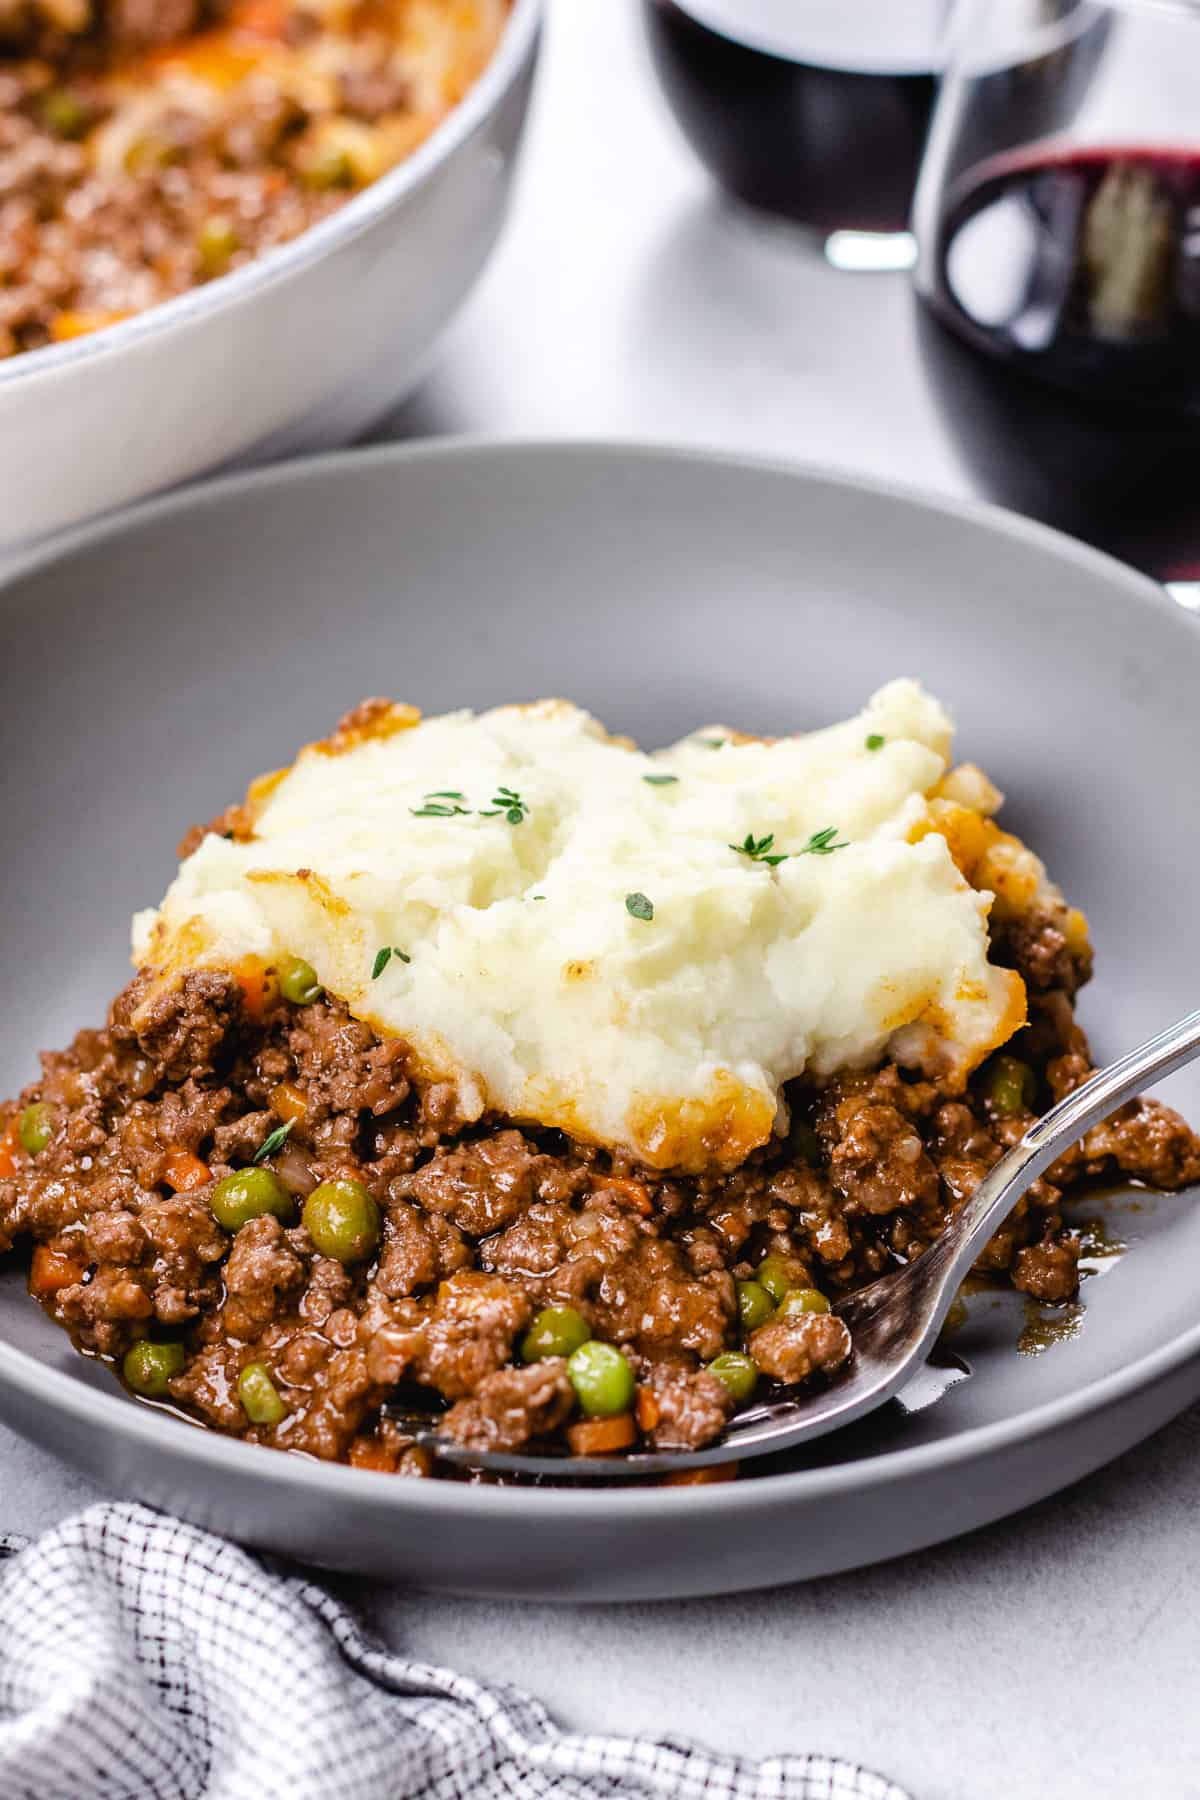 Shepherd's Pie with a fork in a grey bowl.